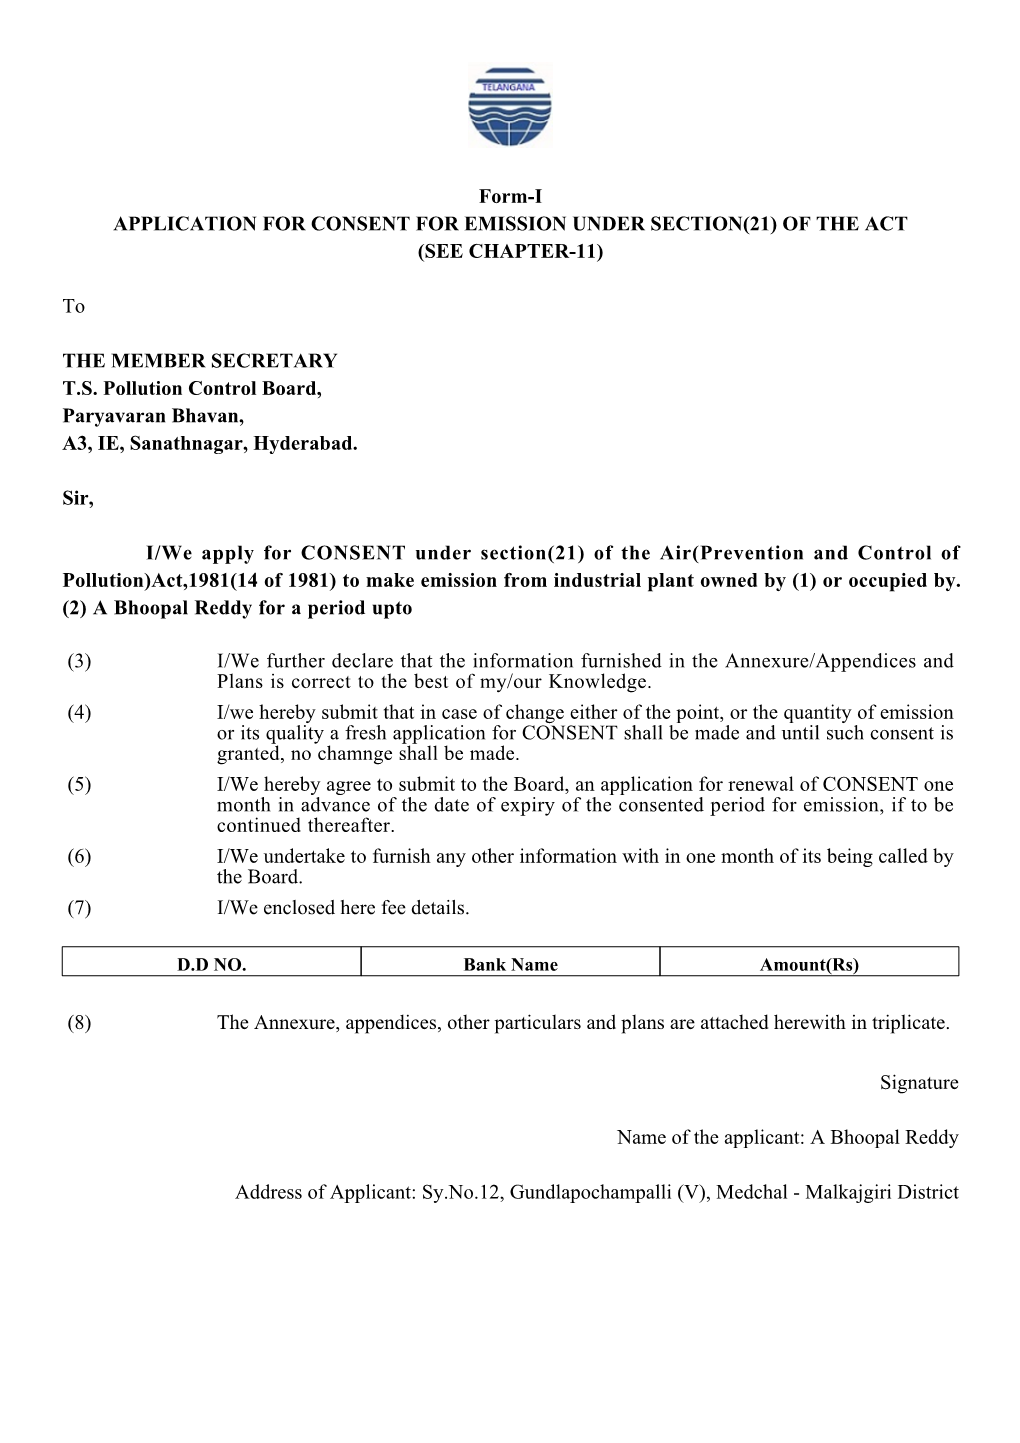 Form-I APPLICATION for CONSENT for EMISSION UNDER SECTION(21) of the ACT (SEE CHAPTER-11)